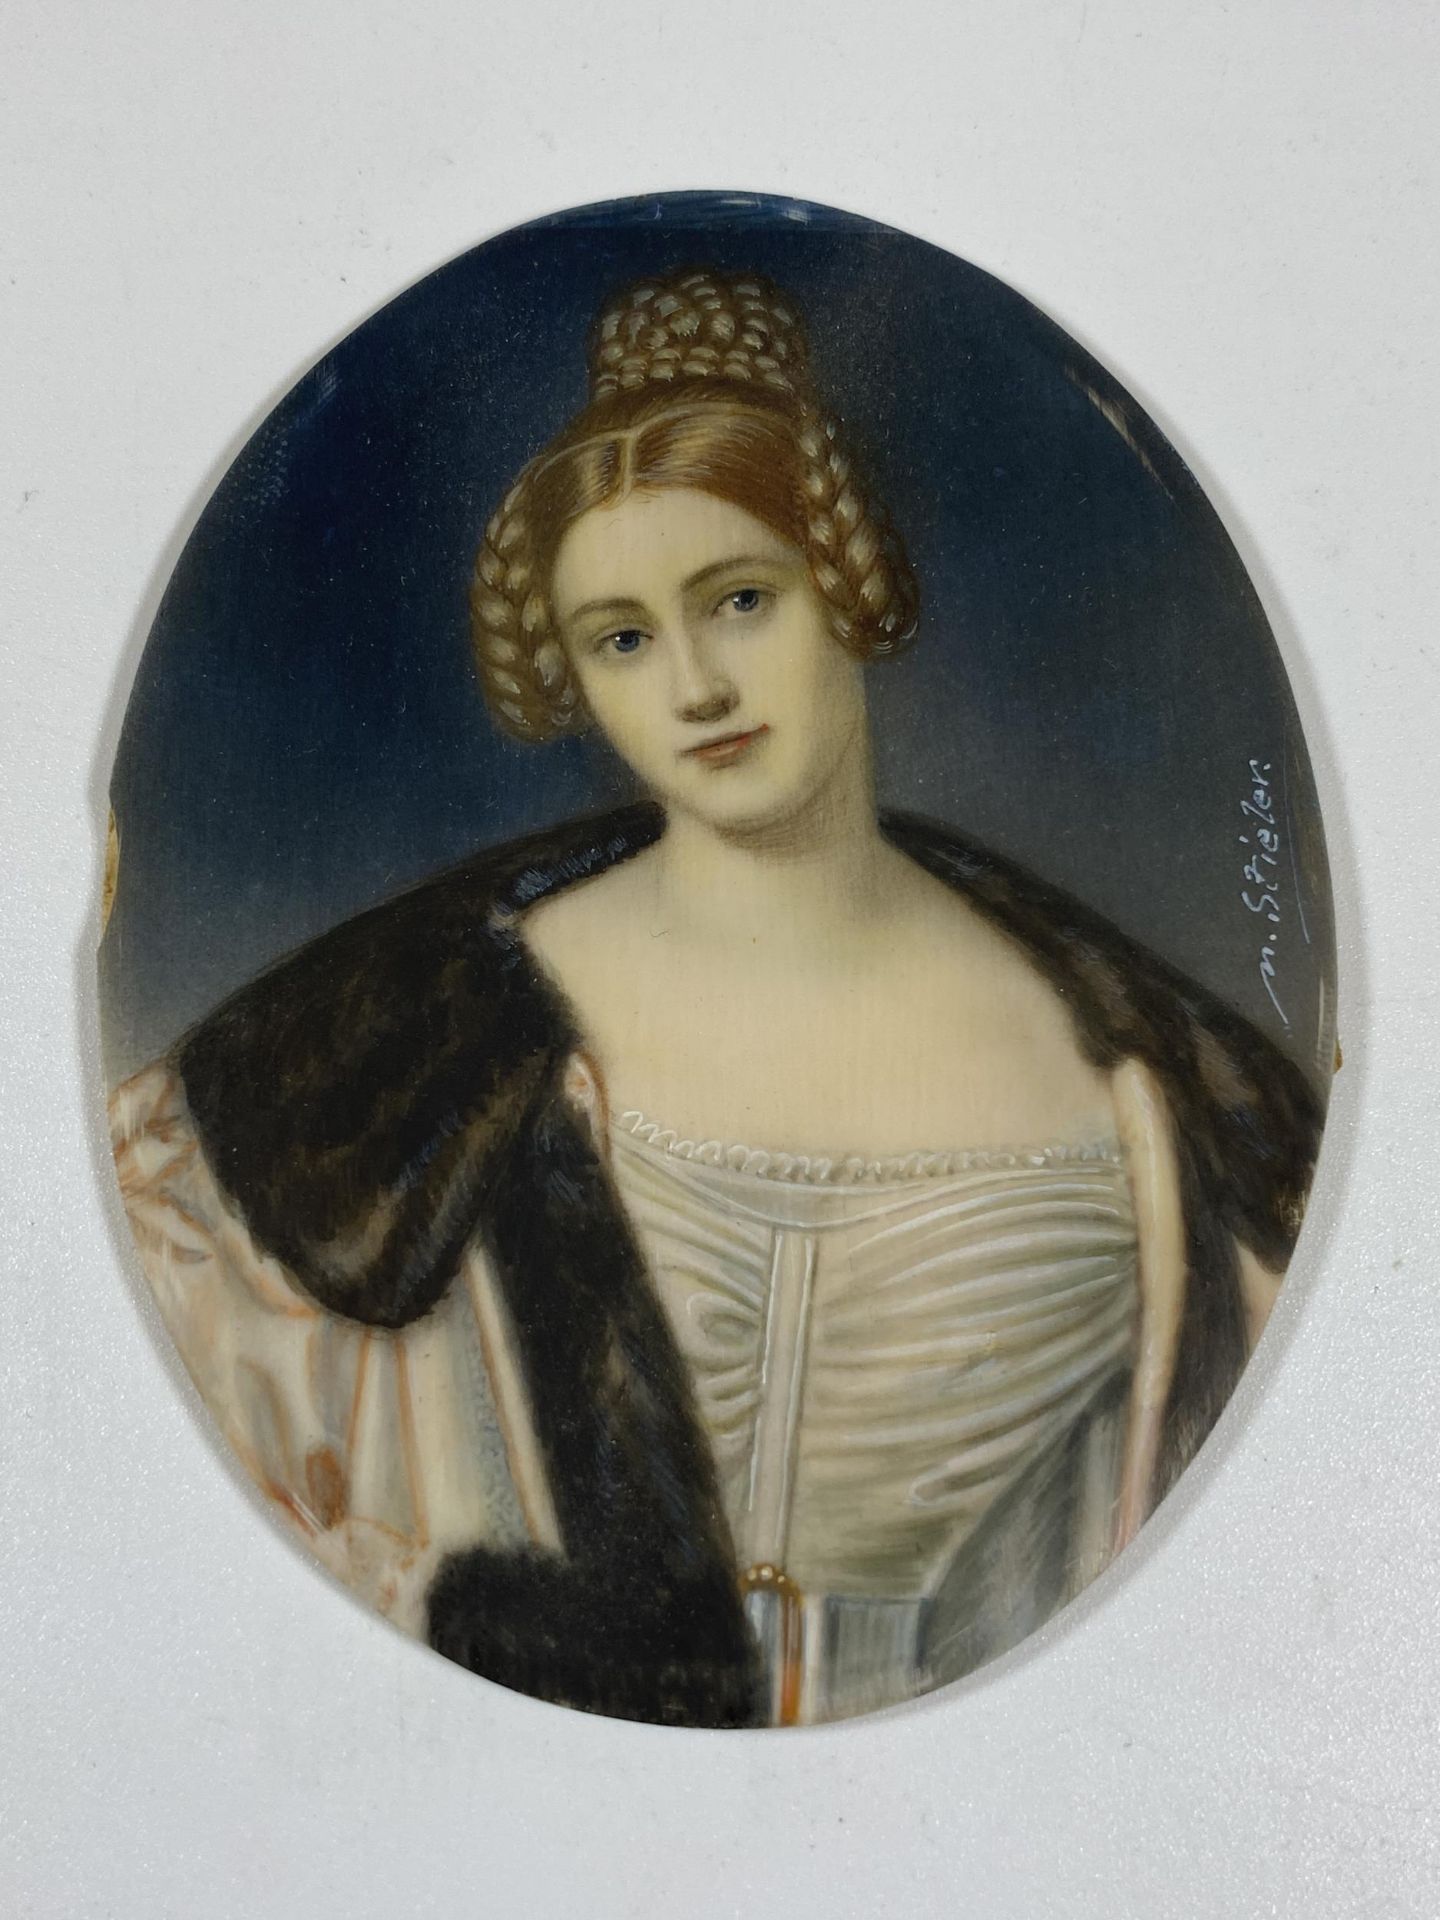 AN EARLY 19TH CENTURY HAND PAINTED PORTRAIT OF A LADY, SIGNED M.STIELER, IN ORNATE BRASS OVAL - Image 7 of 12